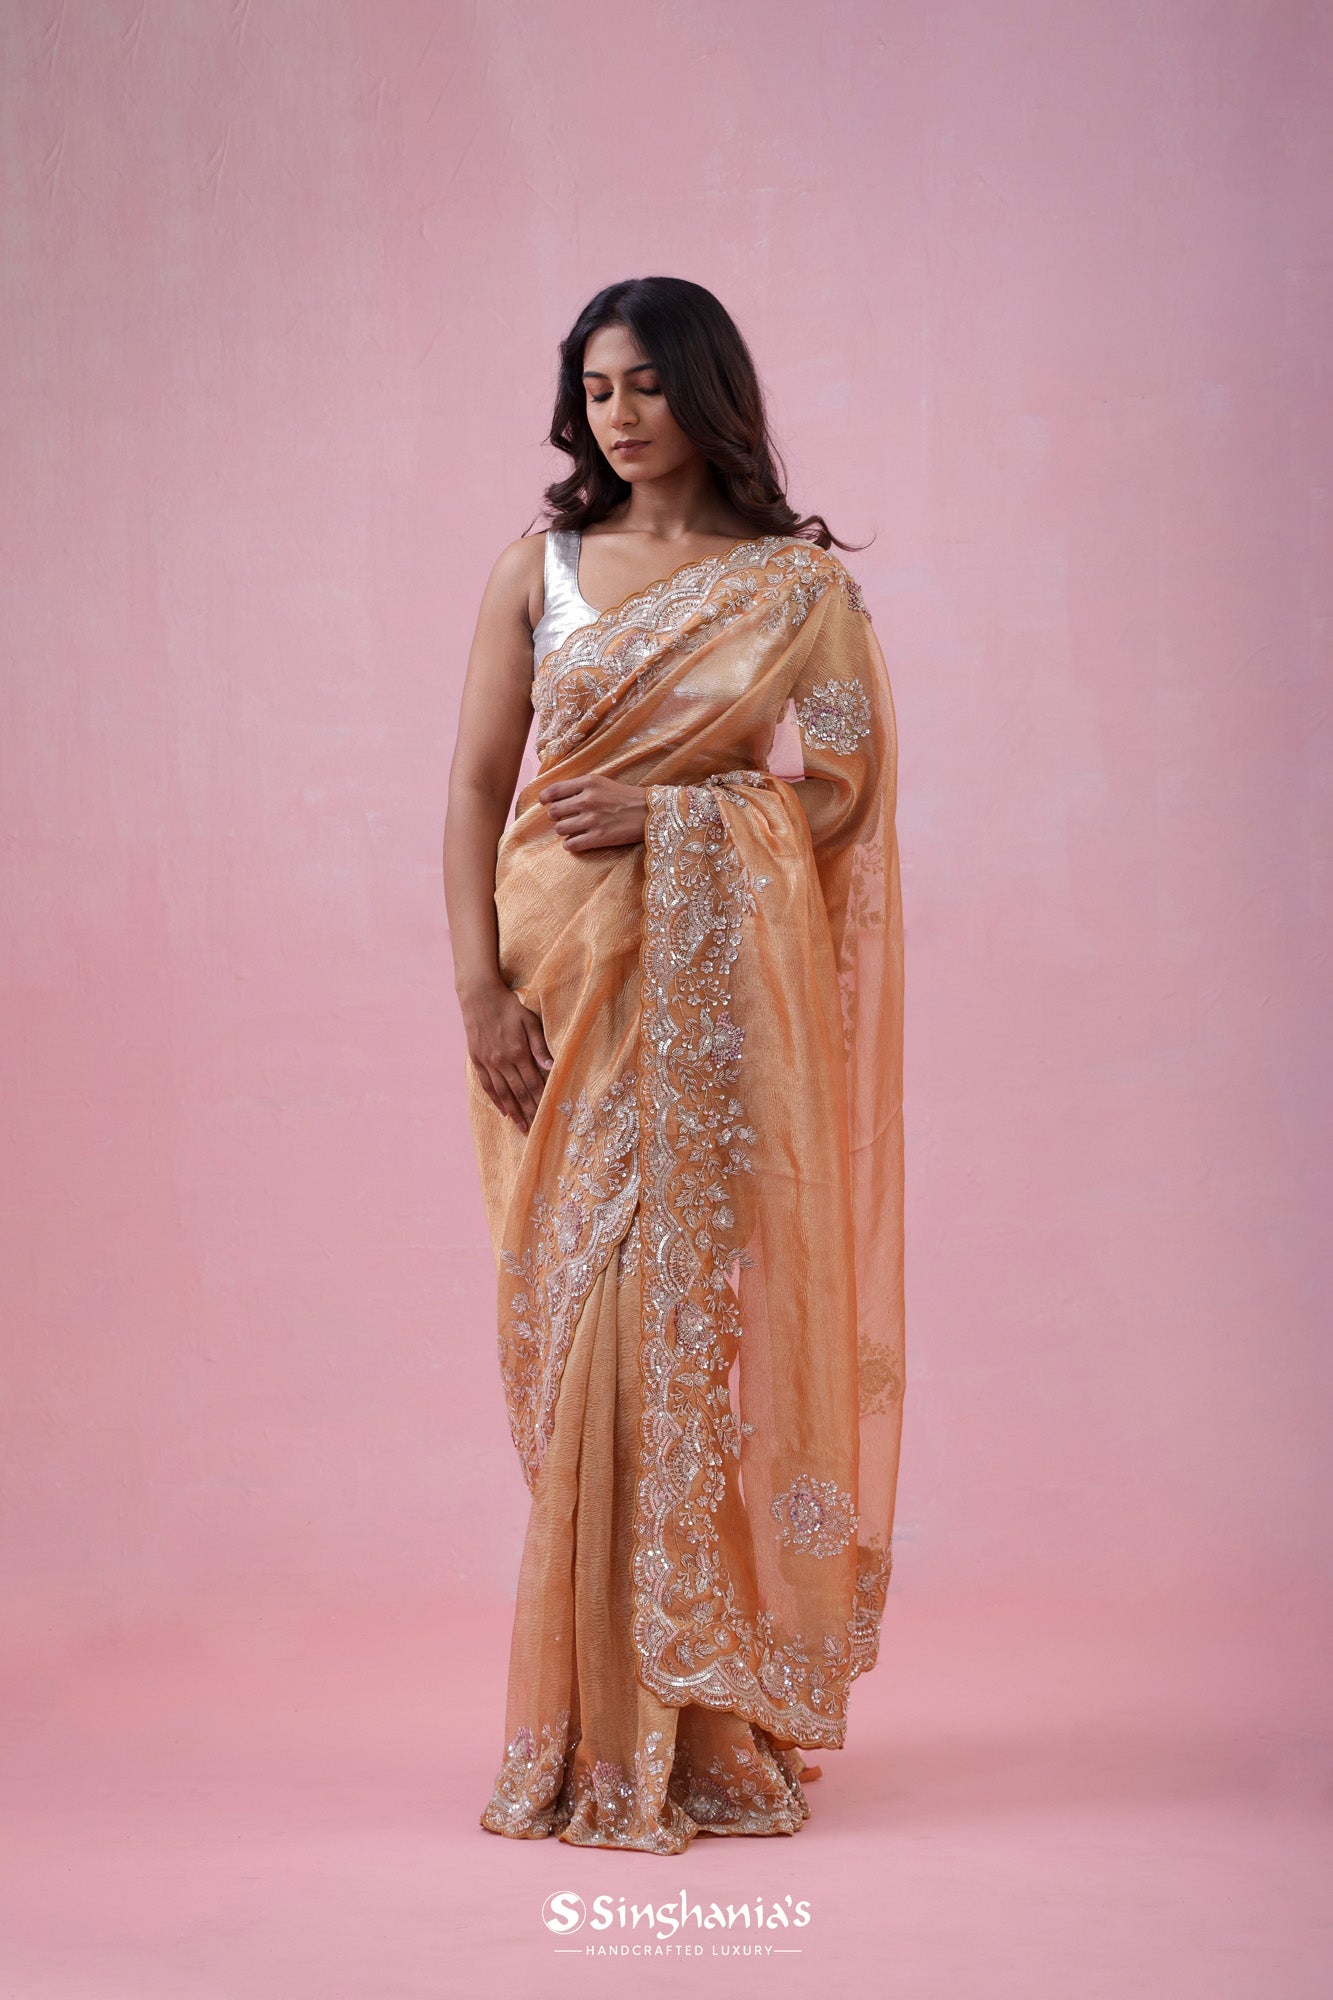 Apricot Peach Crushed Tissue Organza Saree With Hand Embroidery